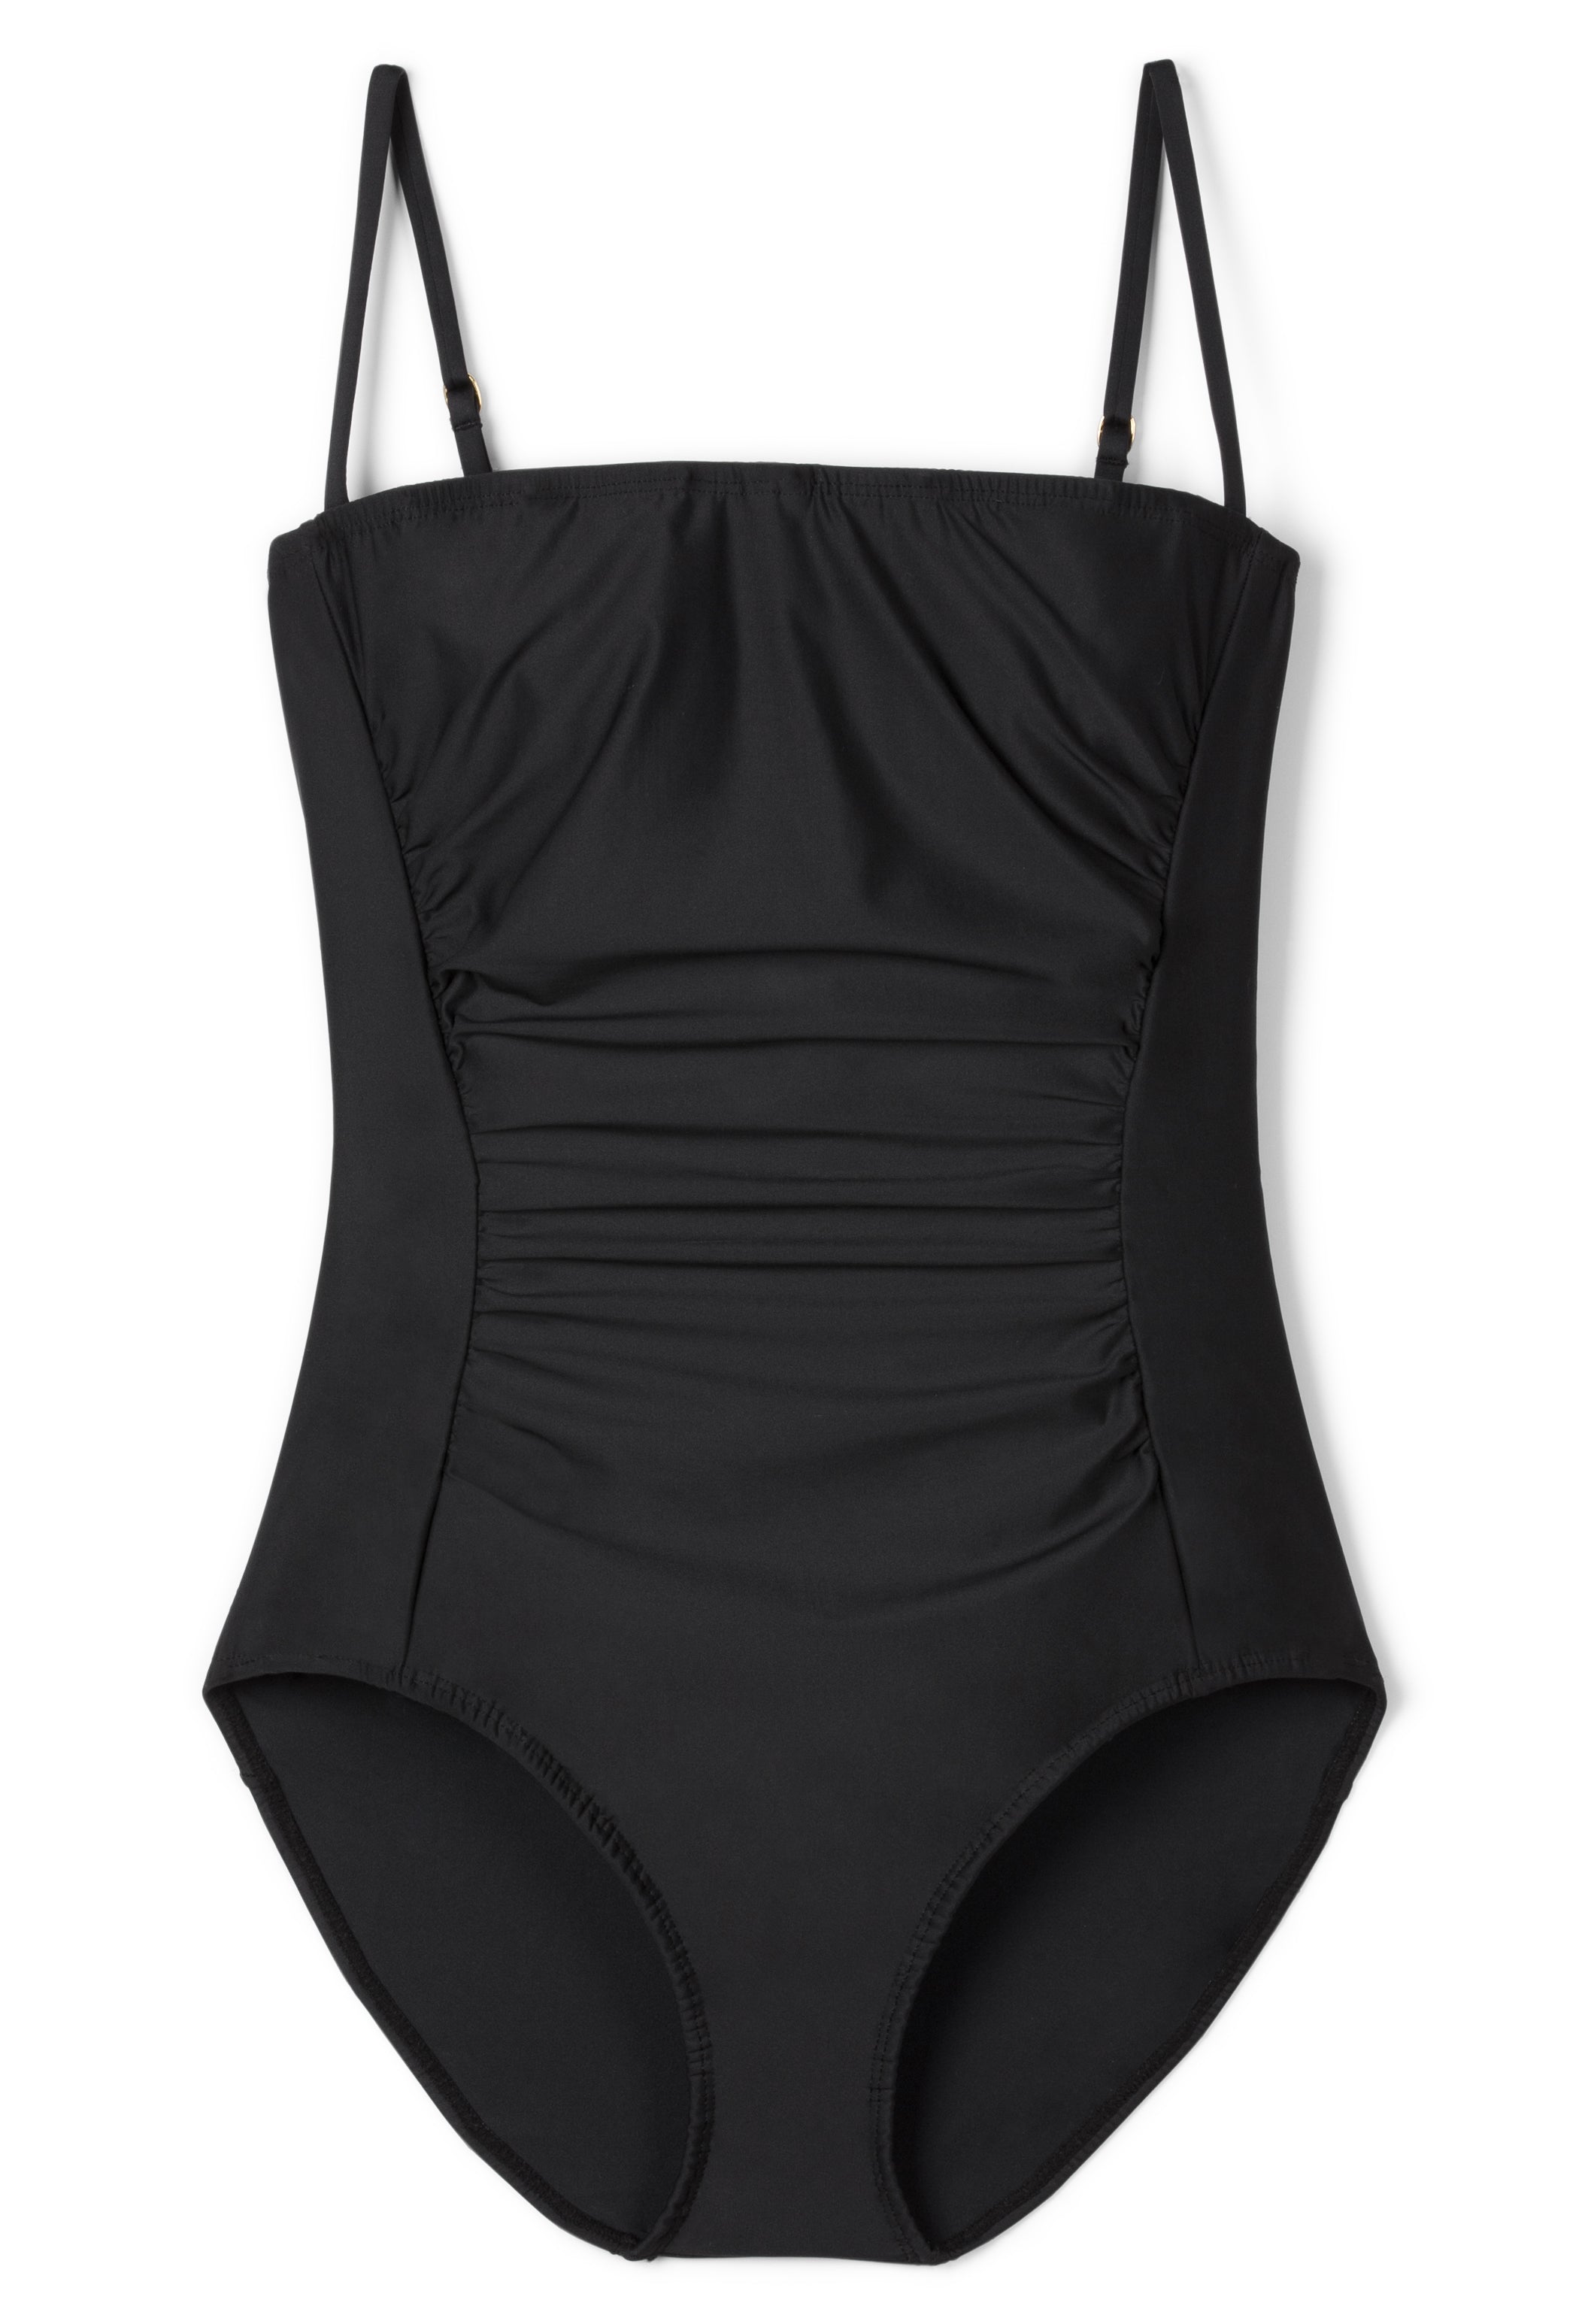 Lupe One-piece Swimsuit by Hermoza